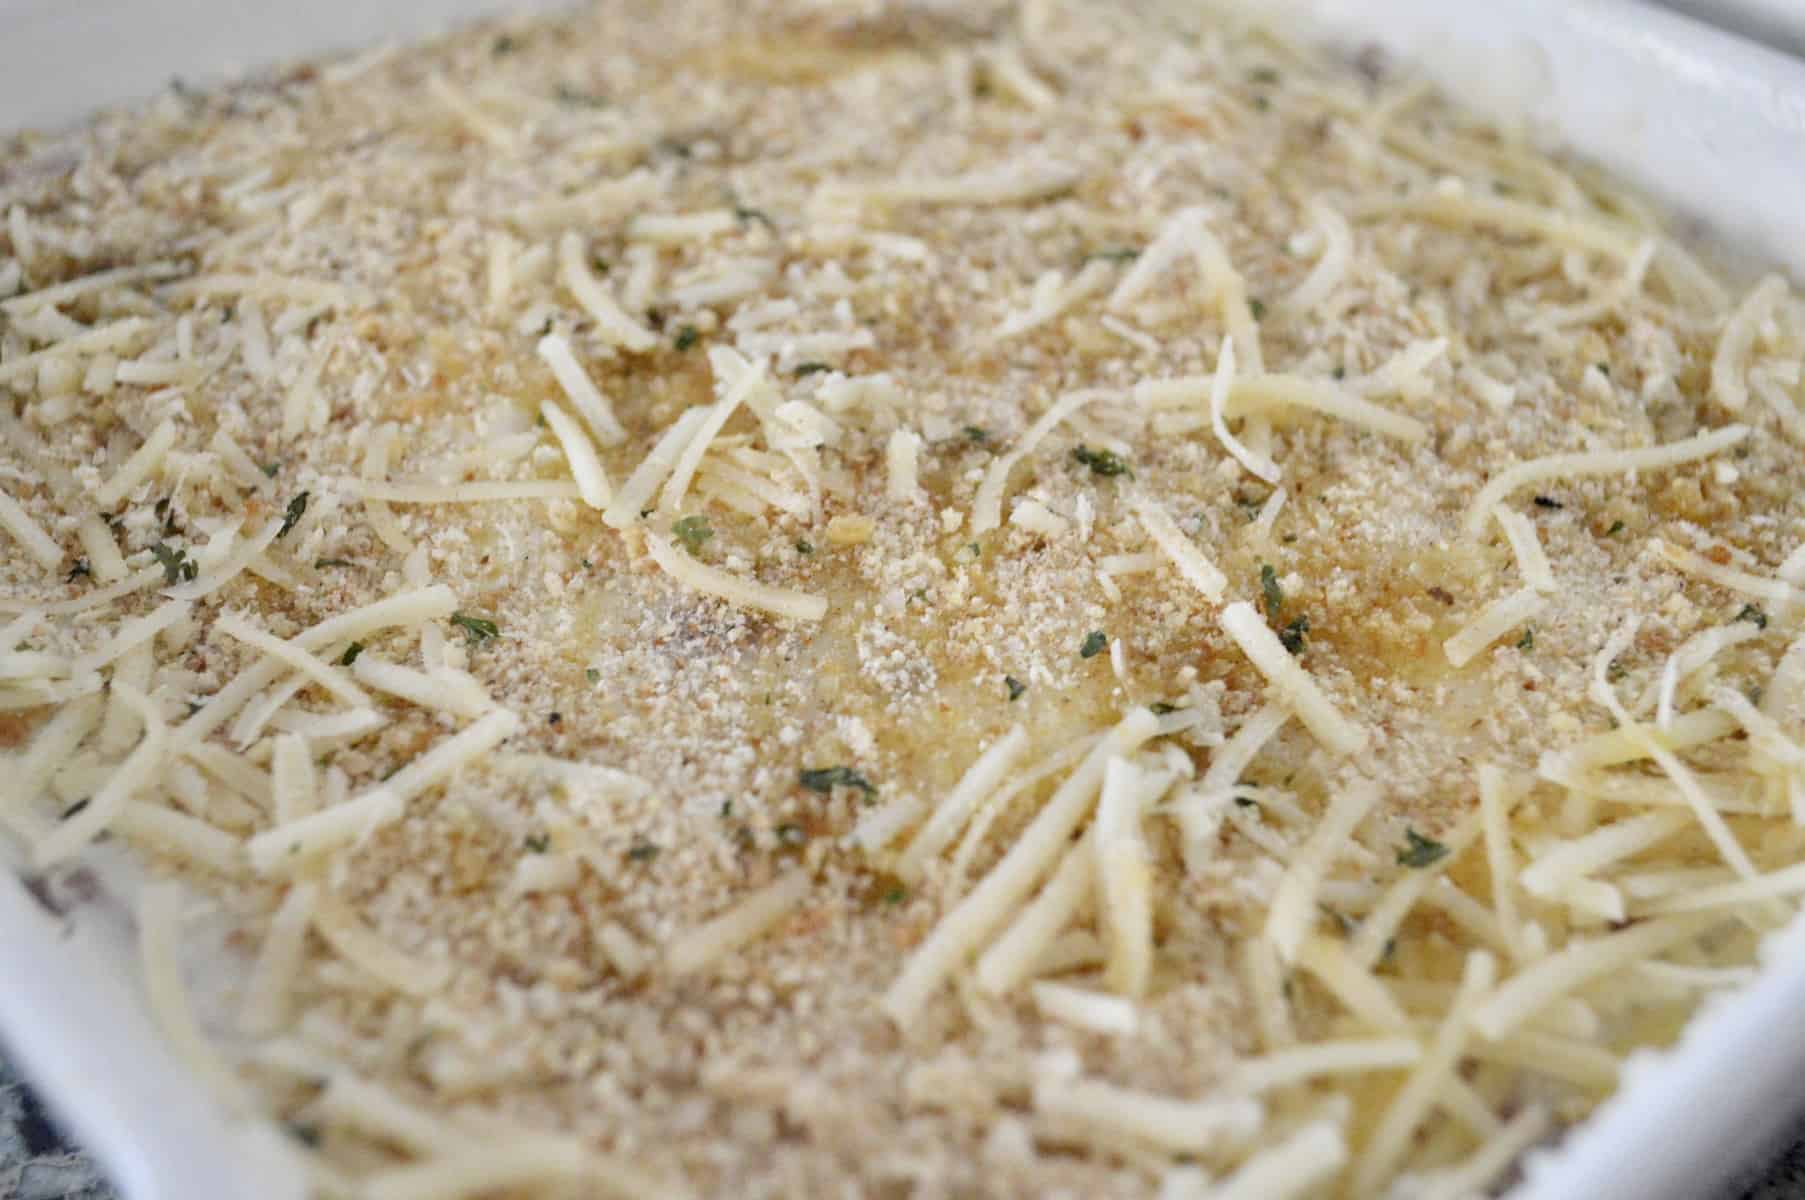 Cheese and bread crumbs sprinkled over the casserole. 